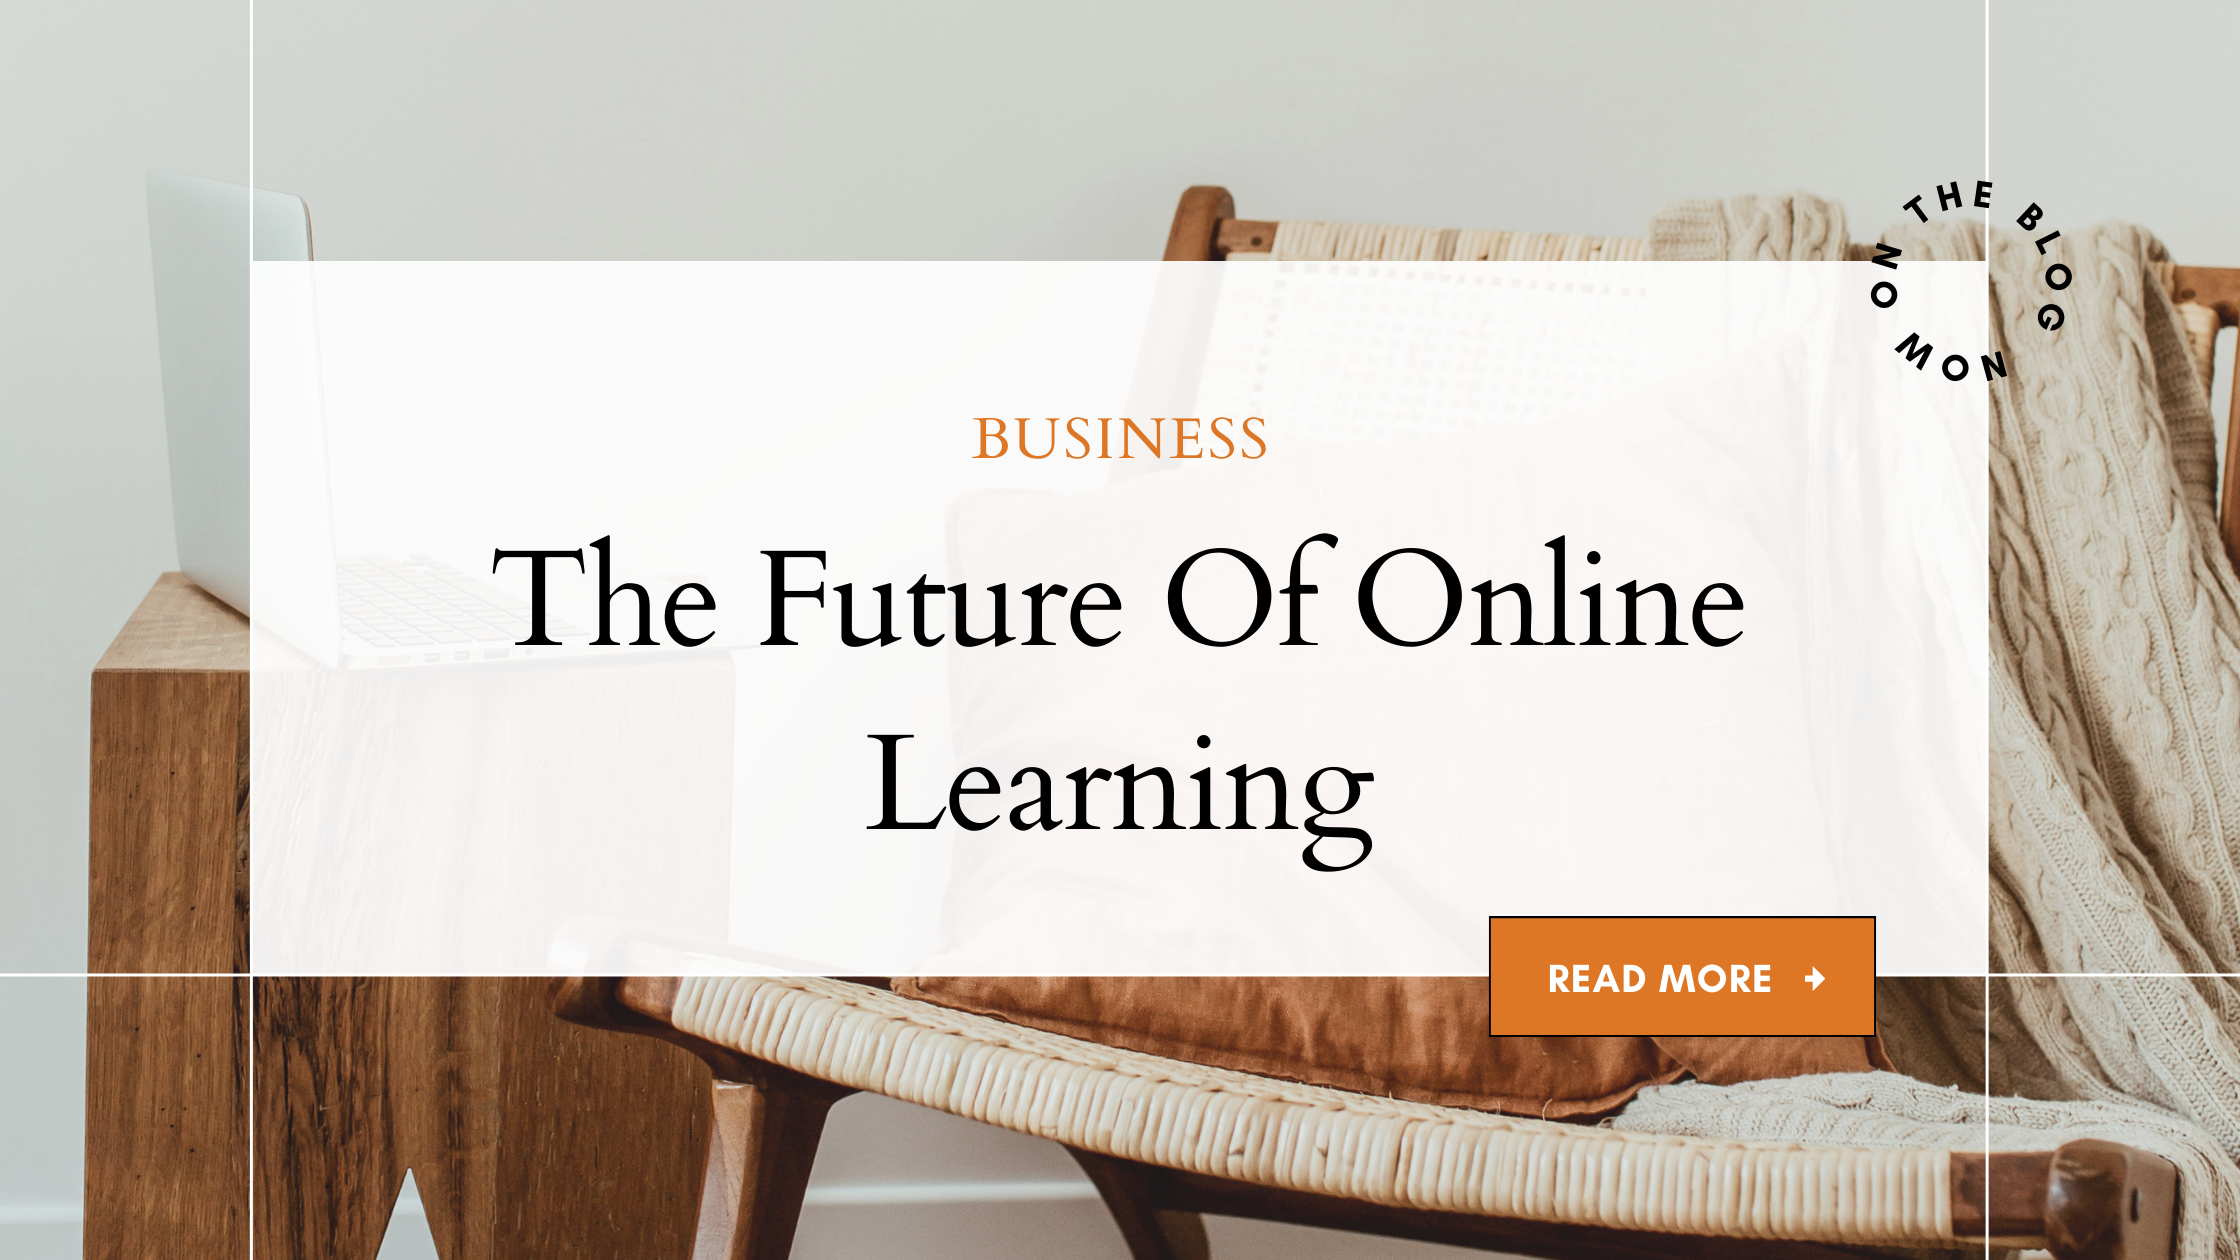 The future of online education for photographers